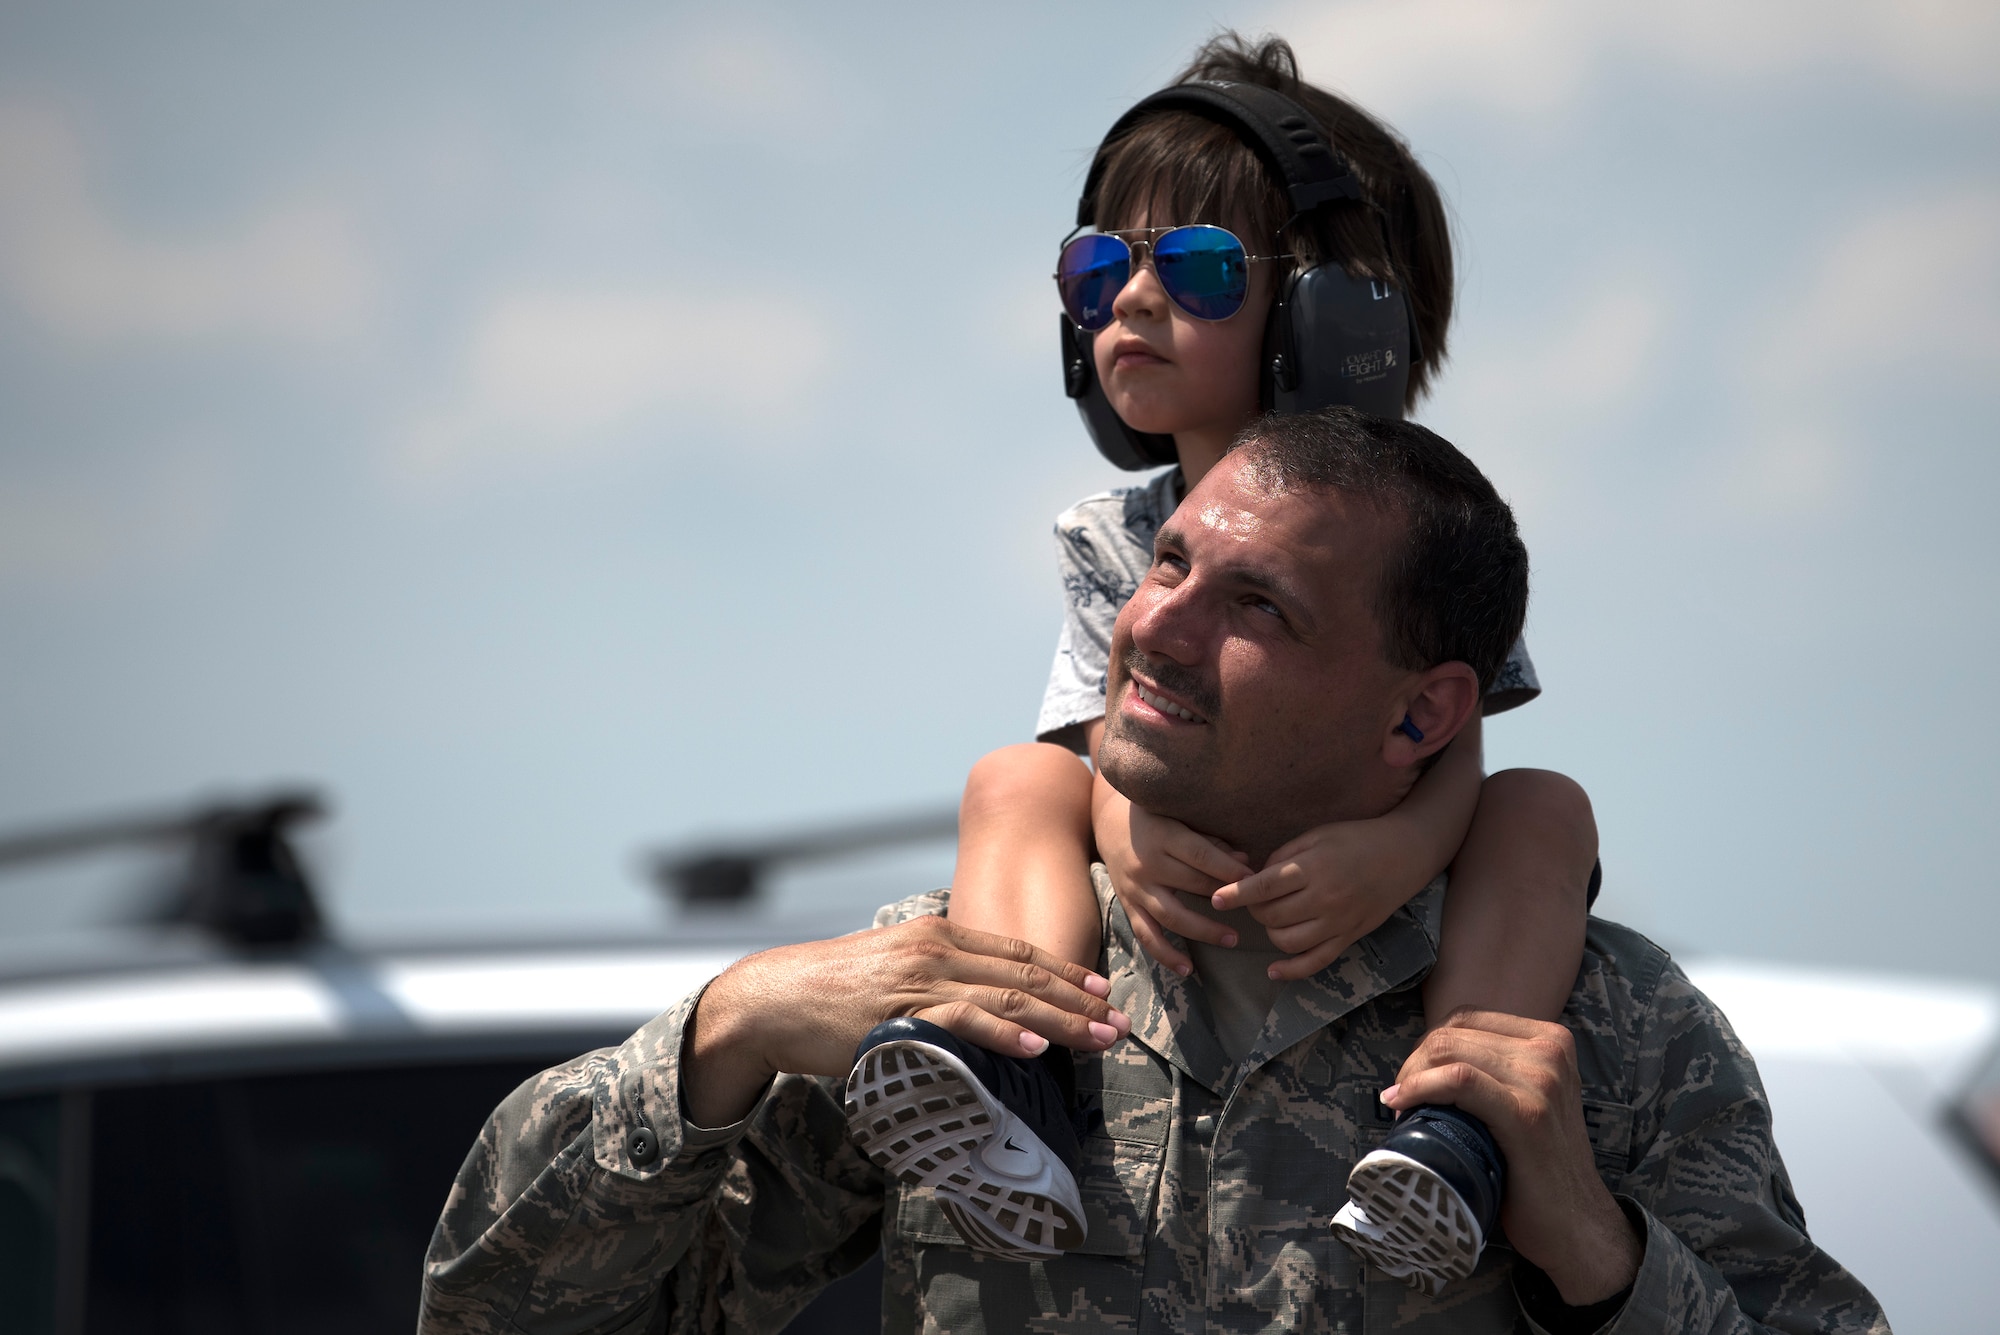 A U.S. Air Force Airman watches aircraft flying by with his son during Tampa Bay AirFest 2018 at MacDill Air Force Base, Fla., May 11, 2018. Over a three-day span, approximately 150,000 attendees experienced aerial demonstrations and interactive static displays.